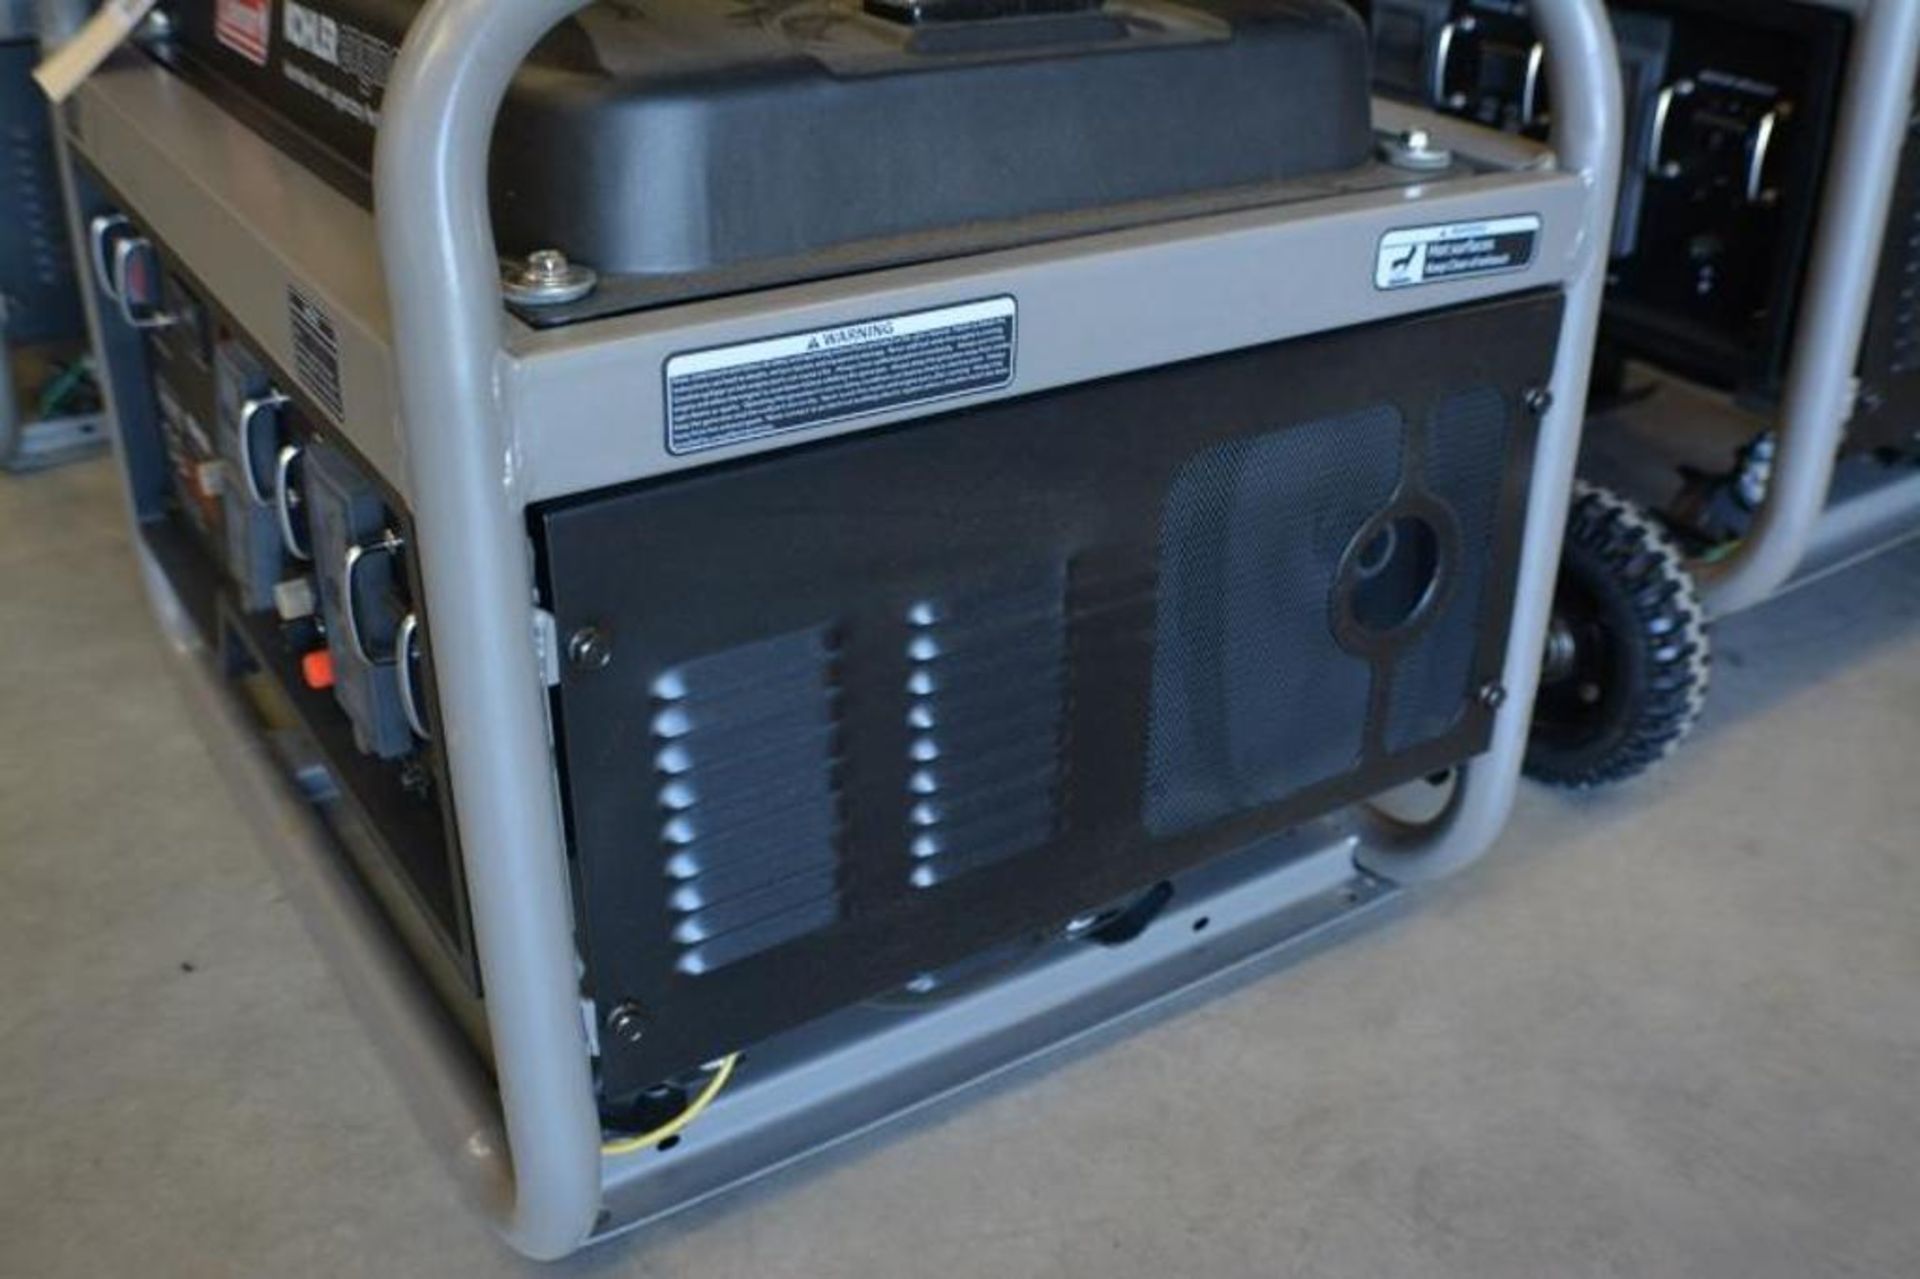 4000 Watts Gasoline Generator 6.5HP 120V with Electric Start by Coleman Powered by Kohler - Image 5 of 6